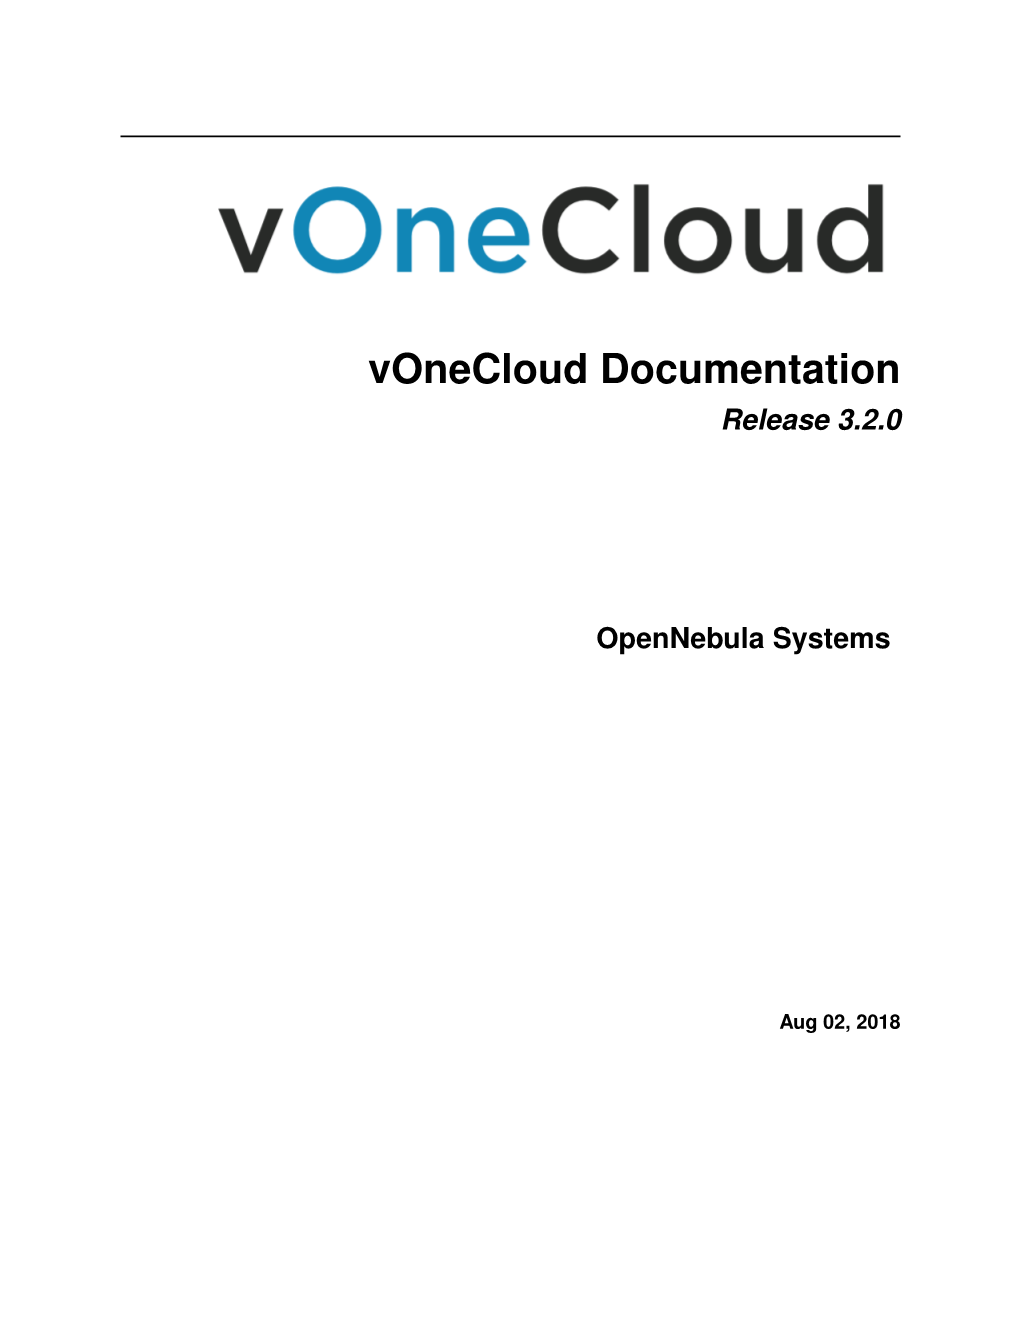 Vonecloud Documentation Release 3.2.0 Opennebula Systems